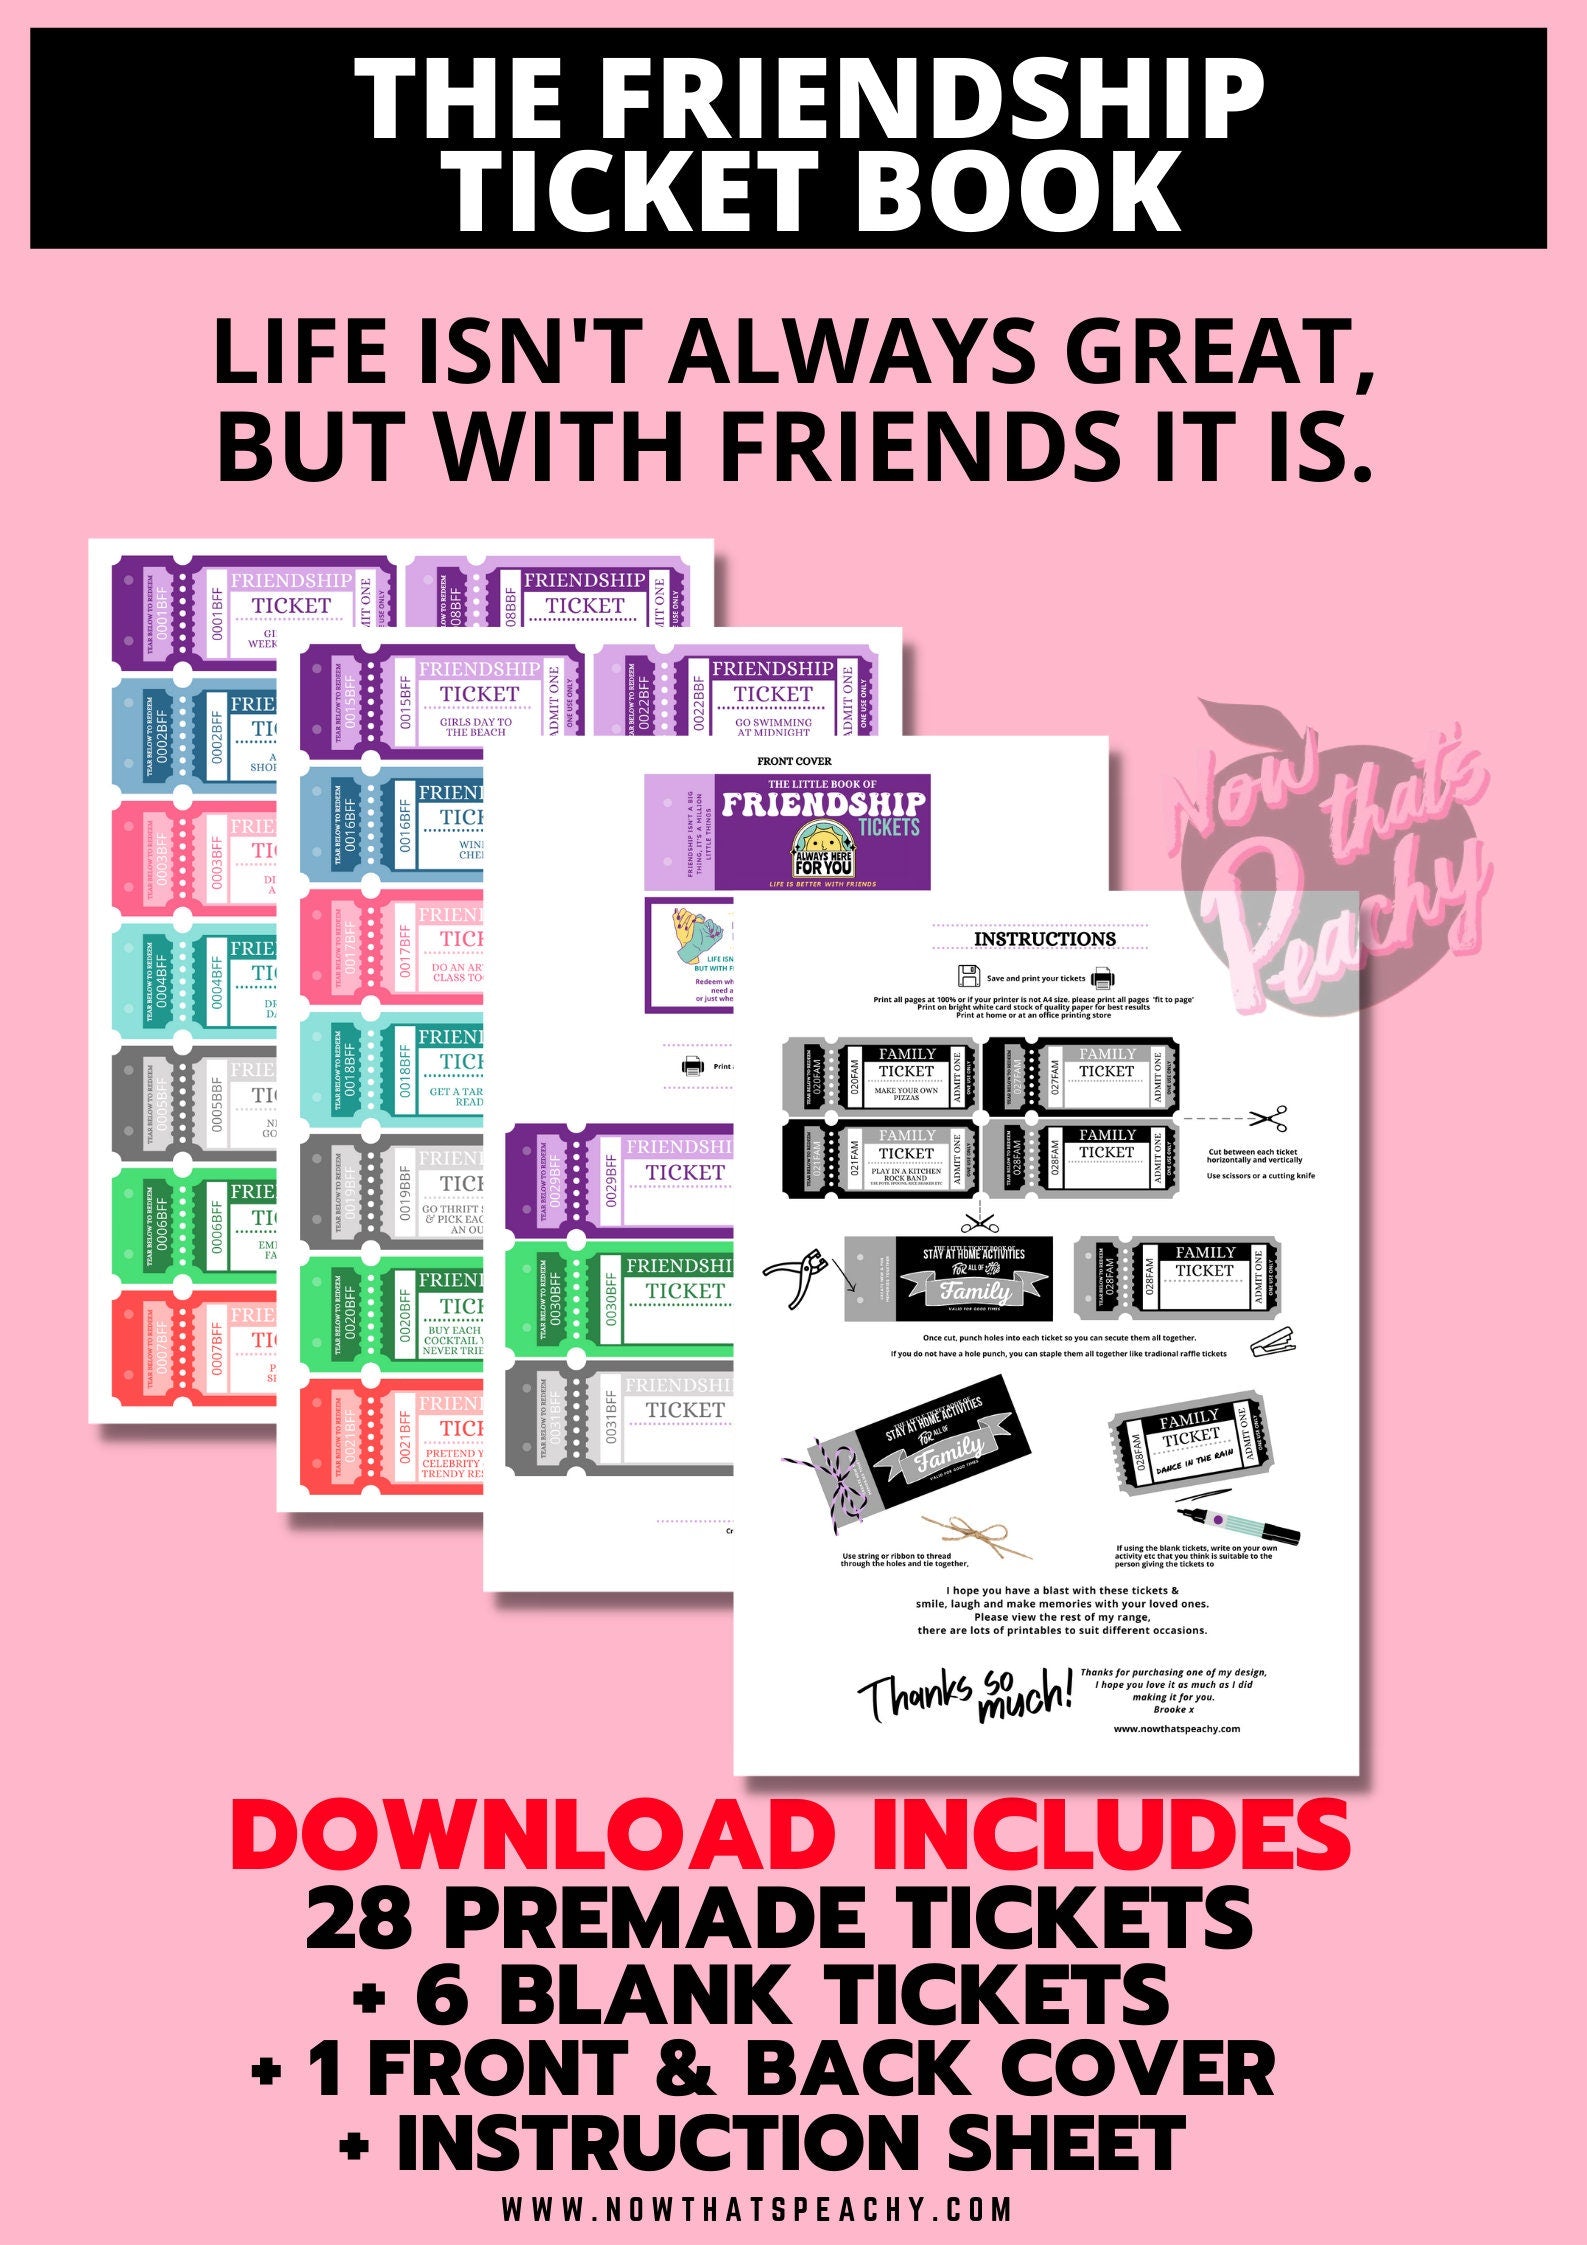 Shop for The Little Book of Friendship Ticket Voucher Coupon book printable DIY Template Blank fun activity bestie BFF friends treat appreciation print off valentines anniversary birthday digital download fun cheeky silly idea present print off funky purple 60s retro vintage y2k theme boyfriend girlfriend partner Miss lady girl male female adult anti vday  product shop easy cheap affordable budget personalized custom inspiration present